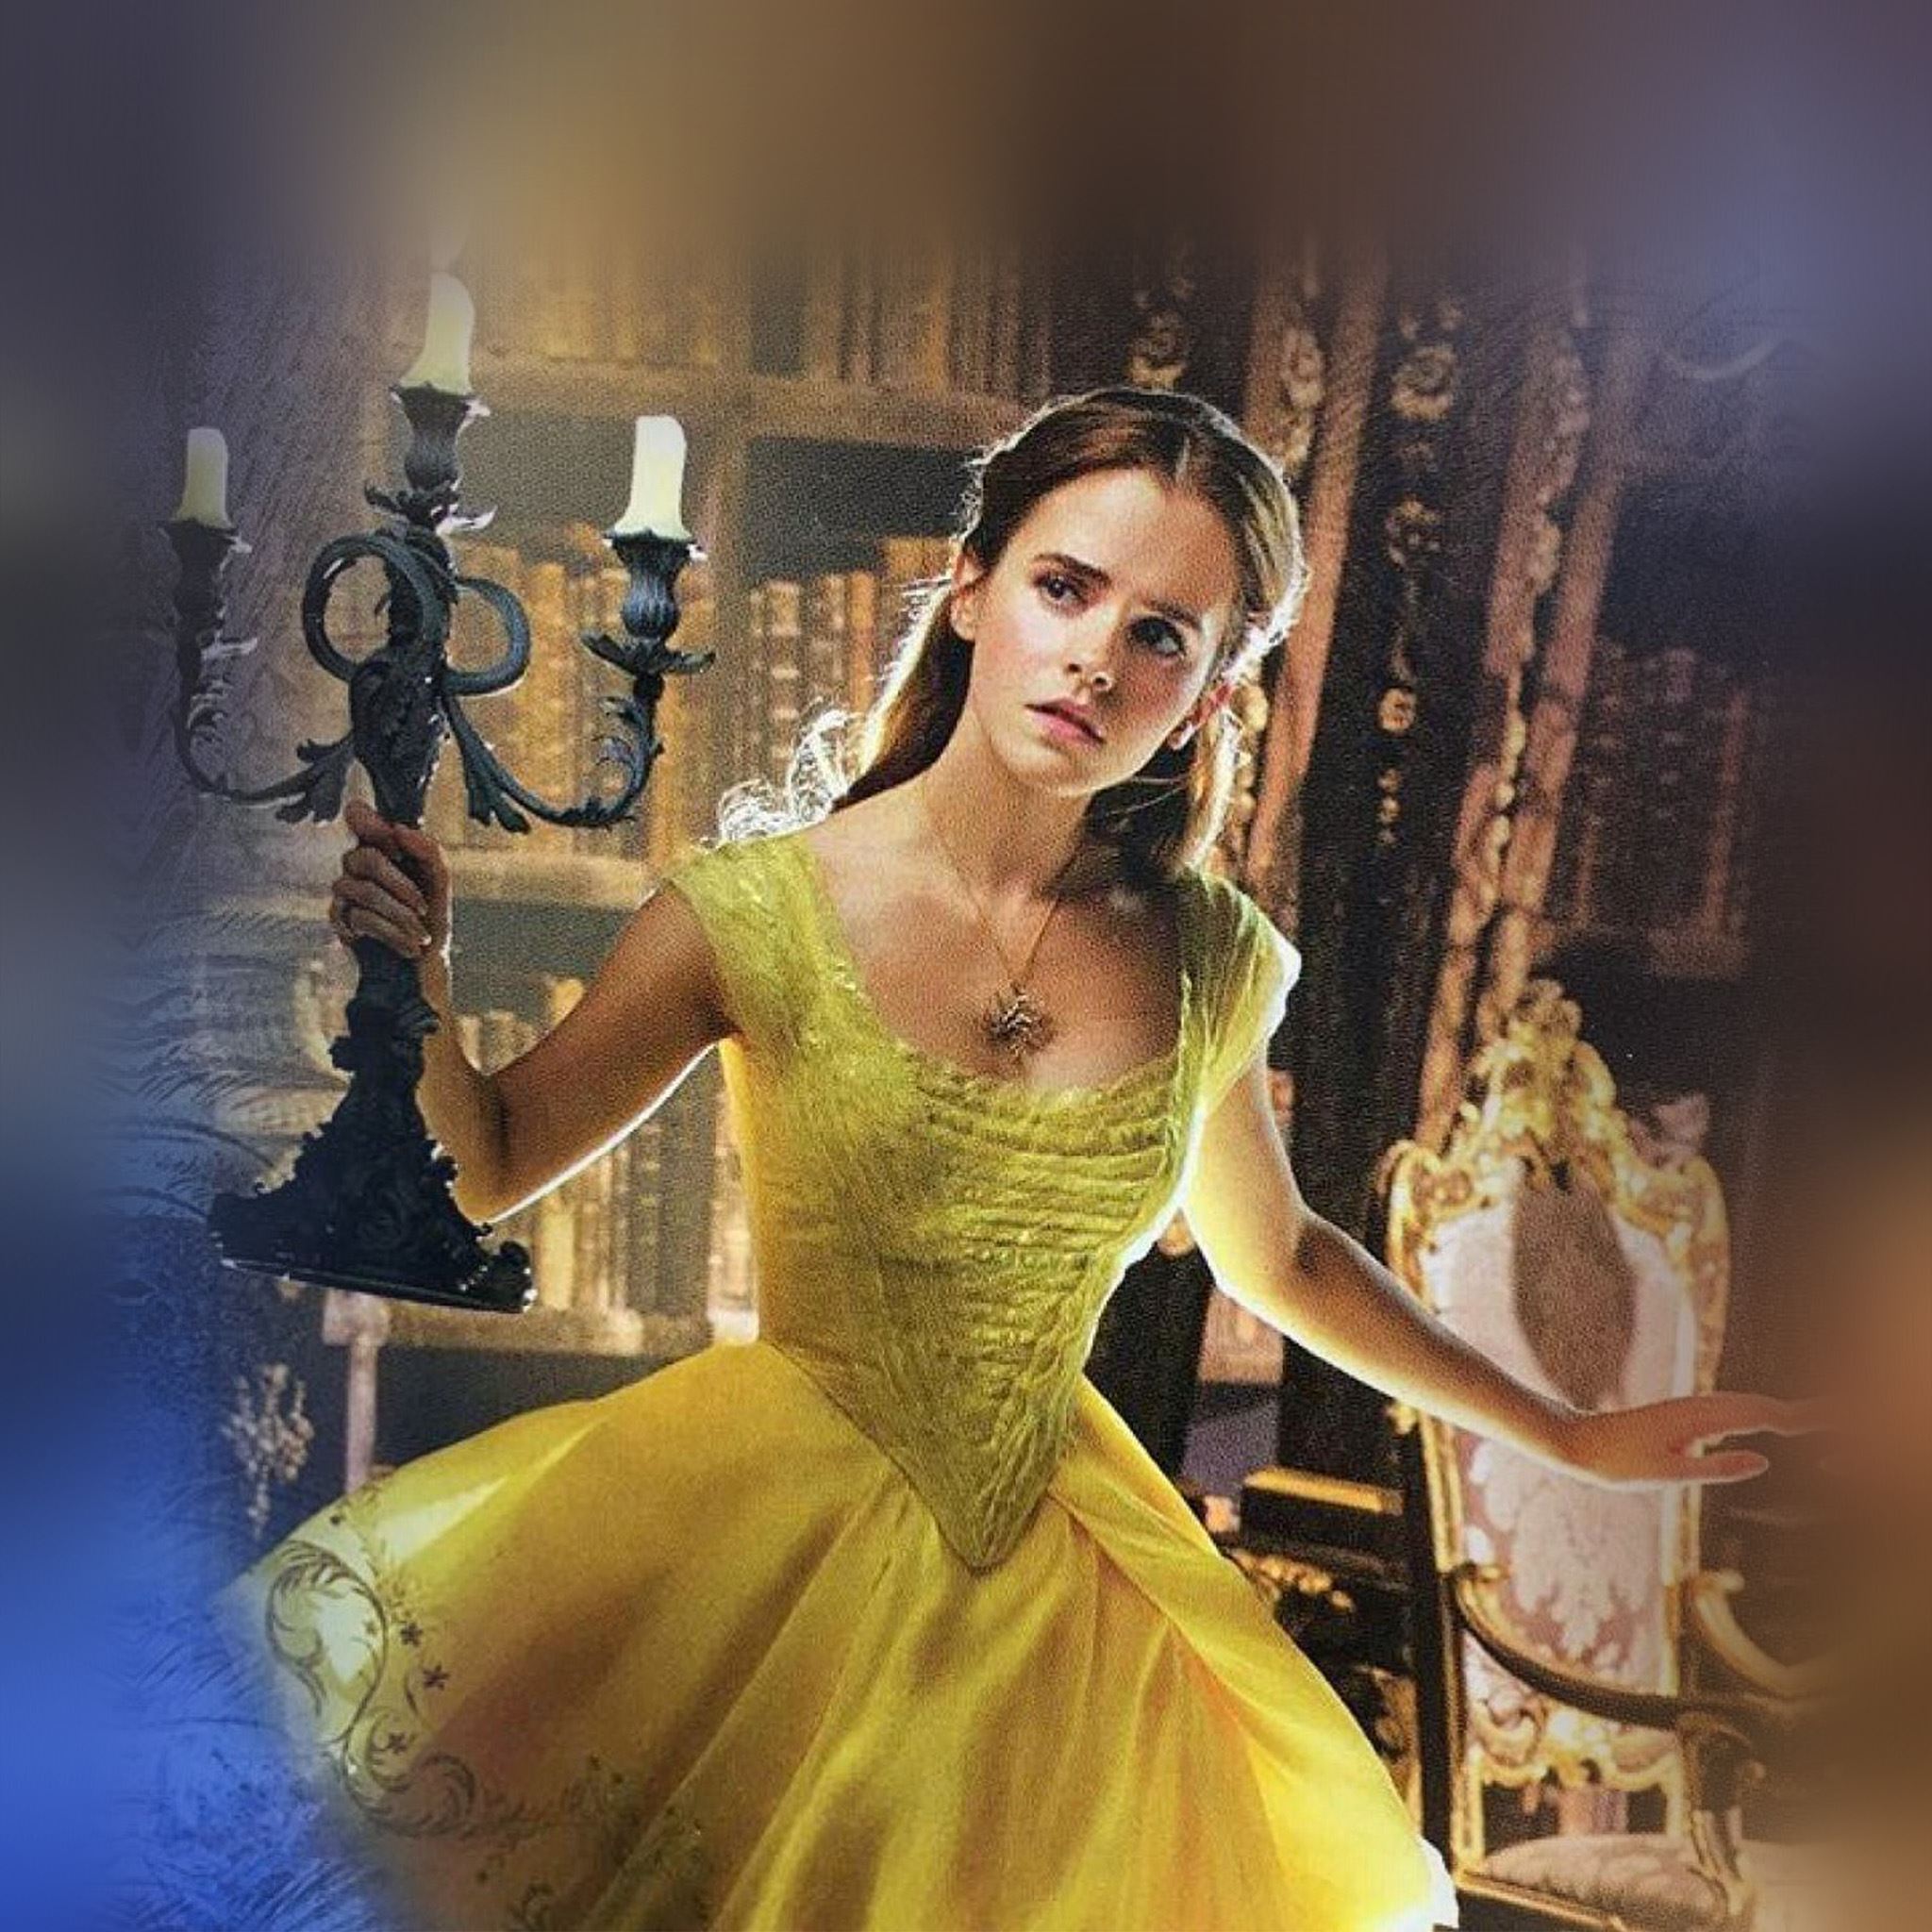 Beauty And The Beast Emma Watson Dress Role Poster iPad Air wallpaper 